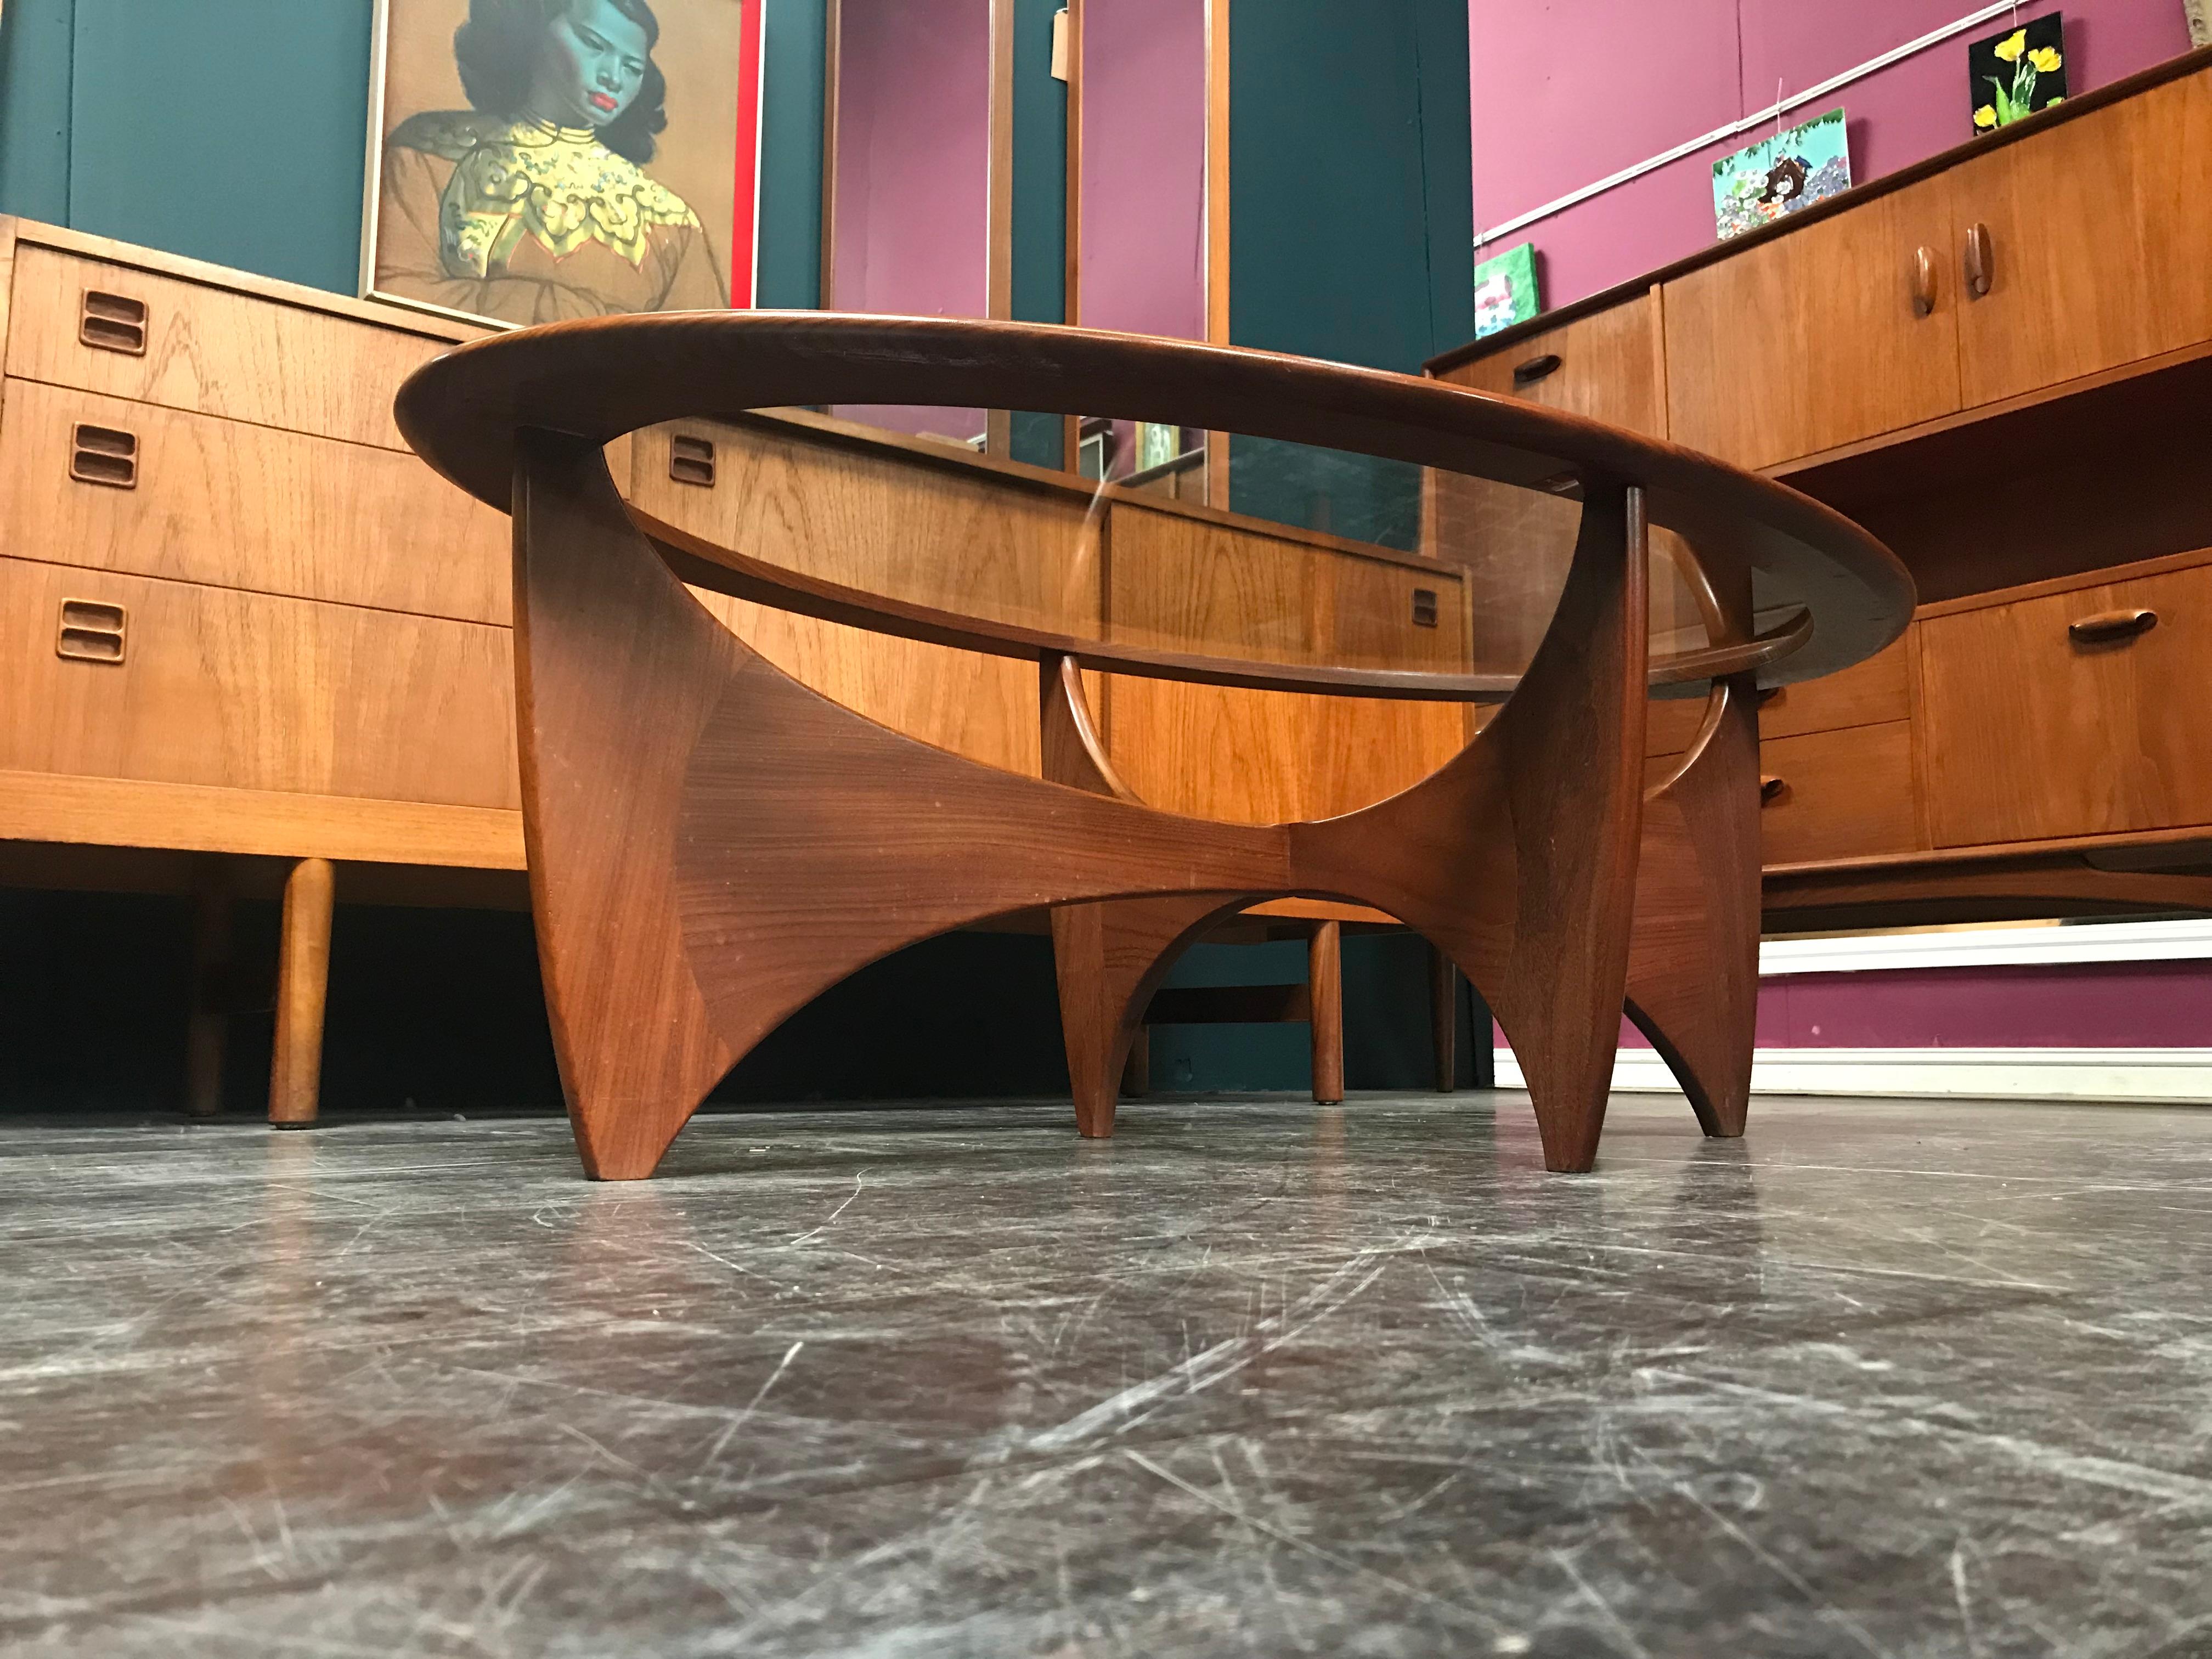 This Astro oval stained teak and glass coffee table was designed by Victor Wilkins for G-Plan, and was produced in England around the 1960s. British furniture designer Victor Bramwell (V.B.) Wilkins is best known for his Fresco range for